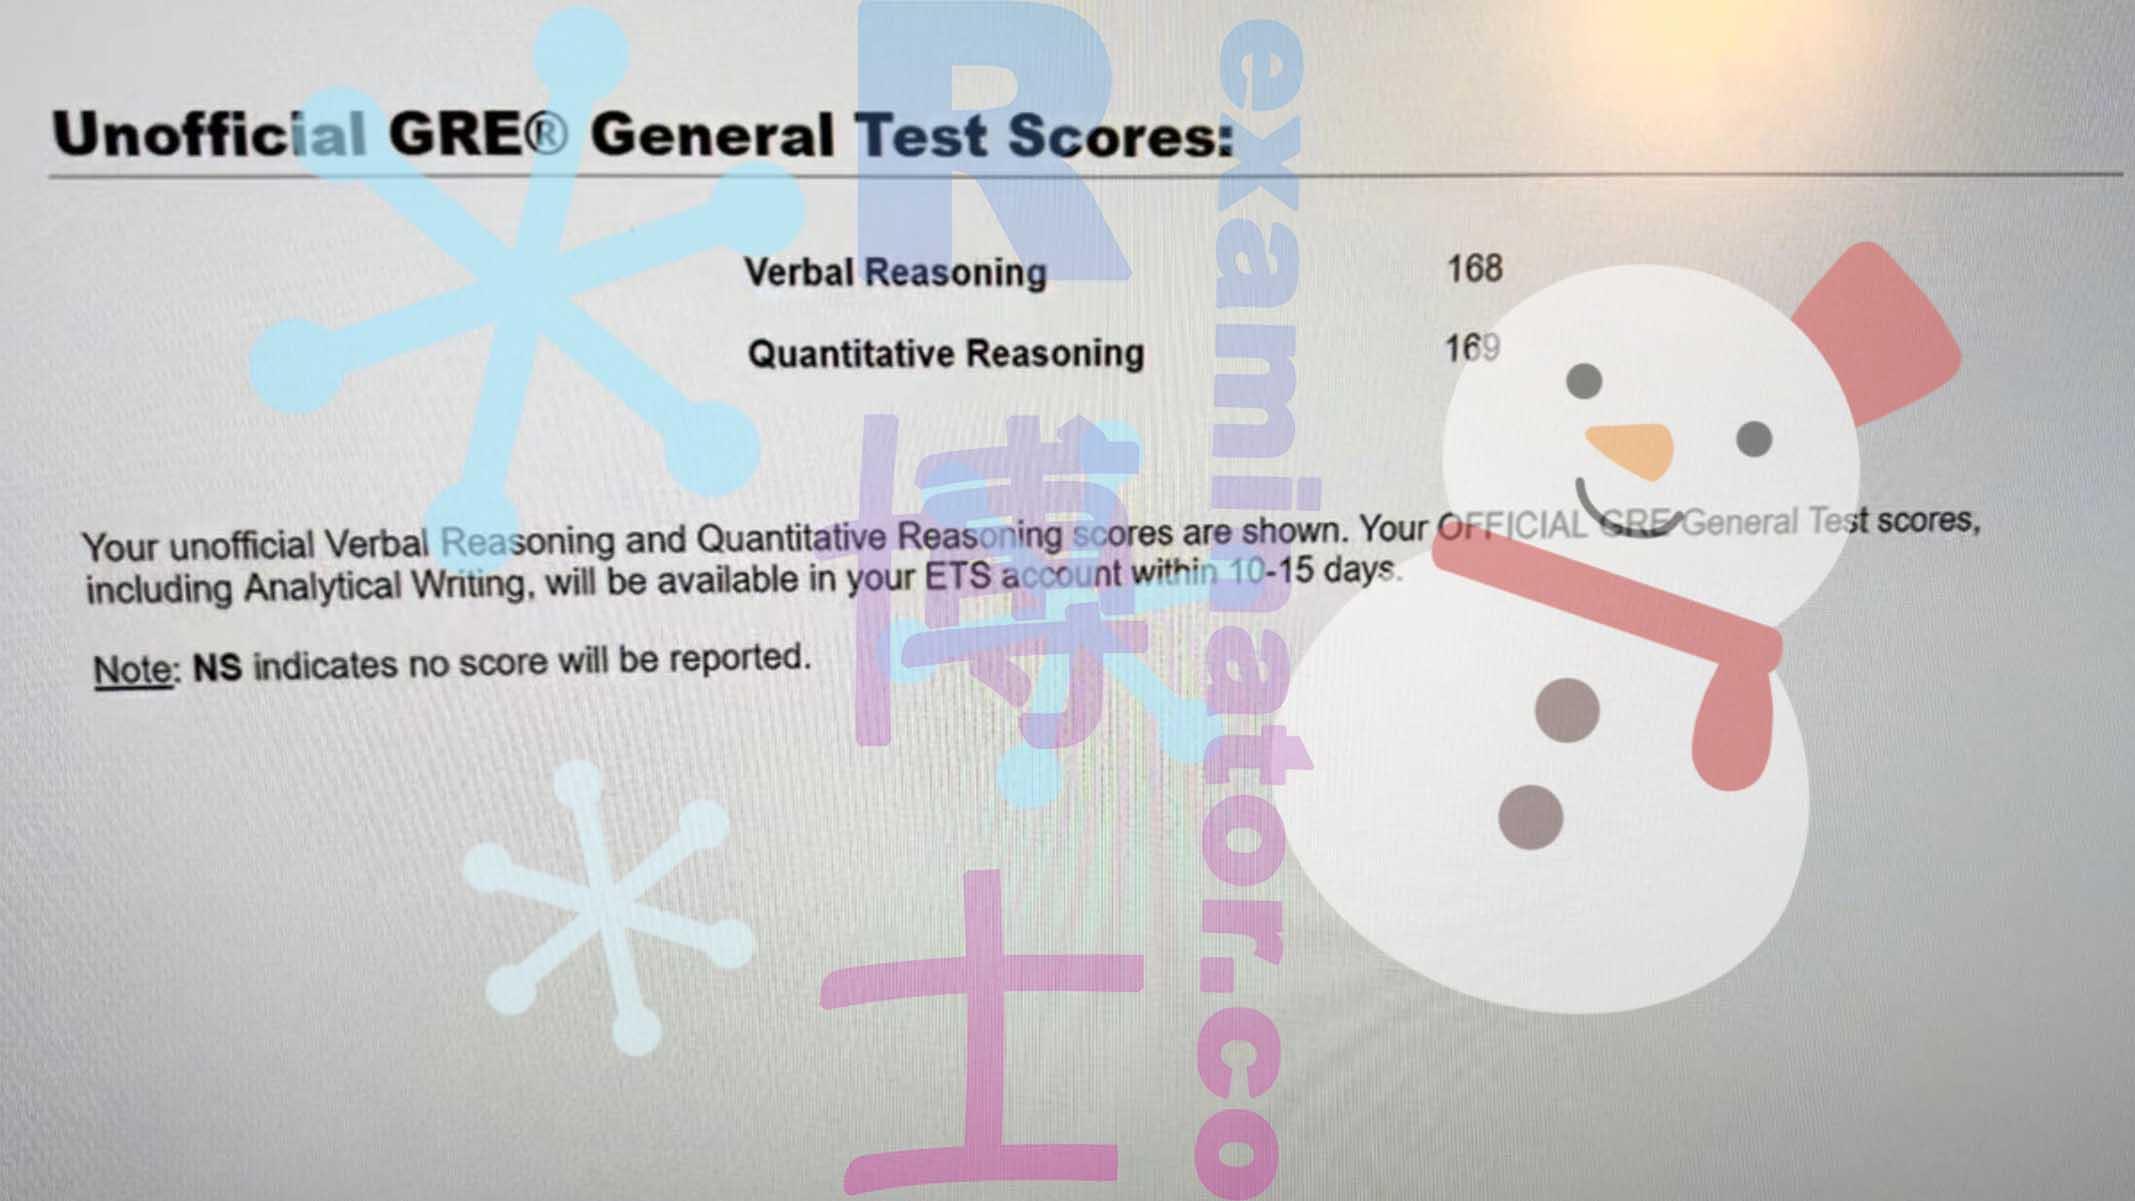 score image for GRE Cheating success story #260